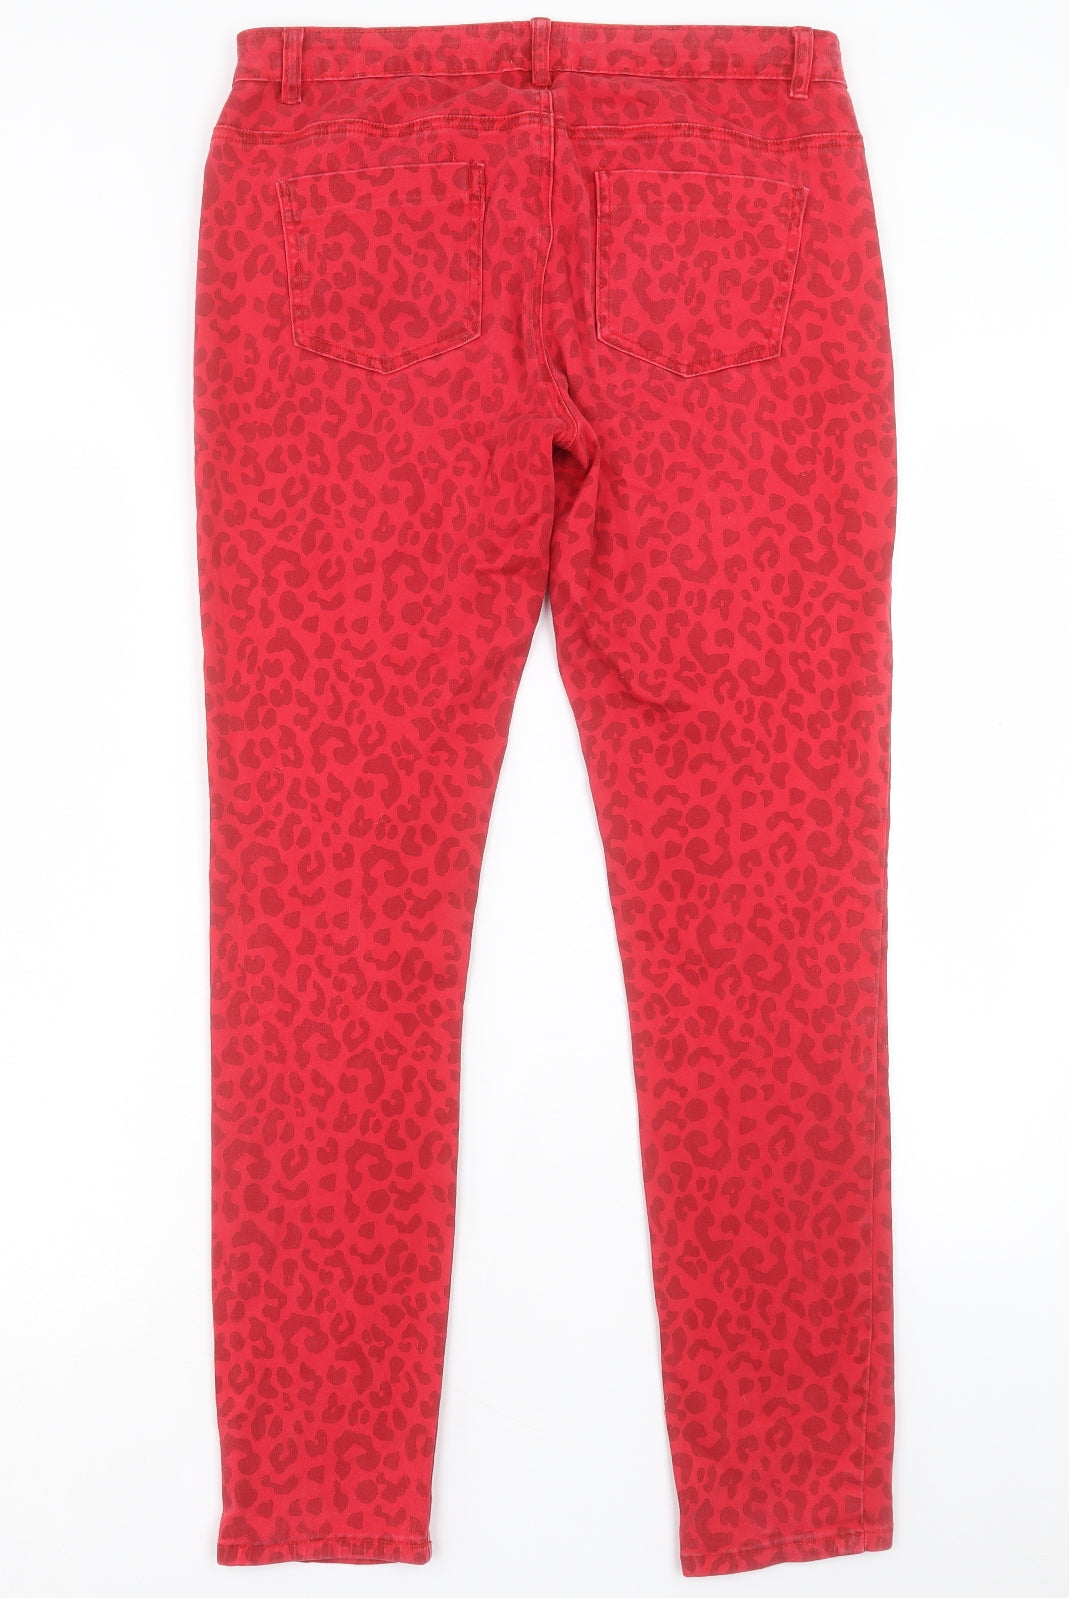 Arabella & Addison Womens Red Animal Print Cotton Skinny Jeans Size L L30 in Regular Button